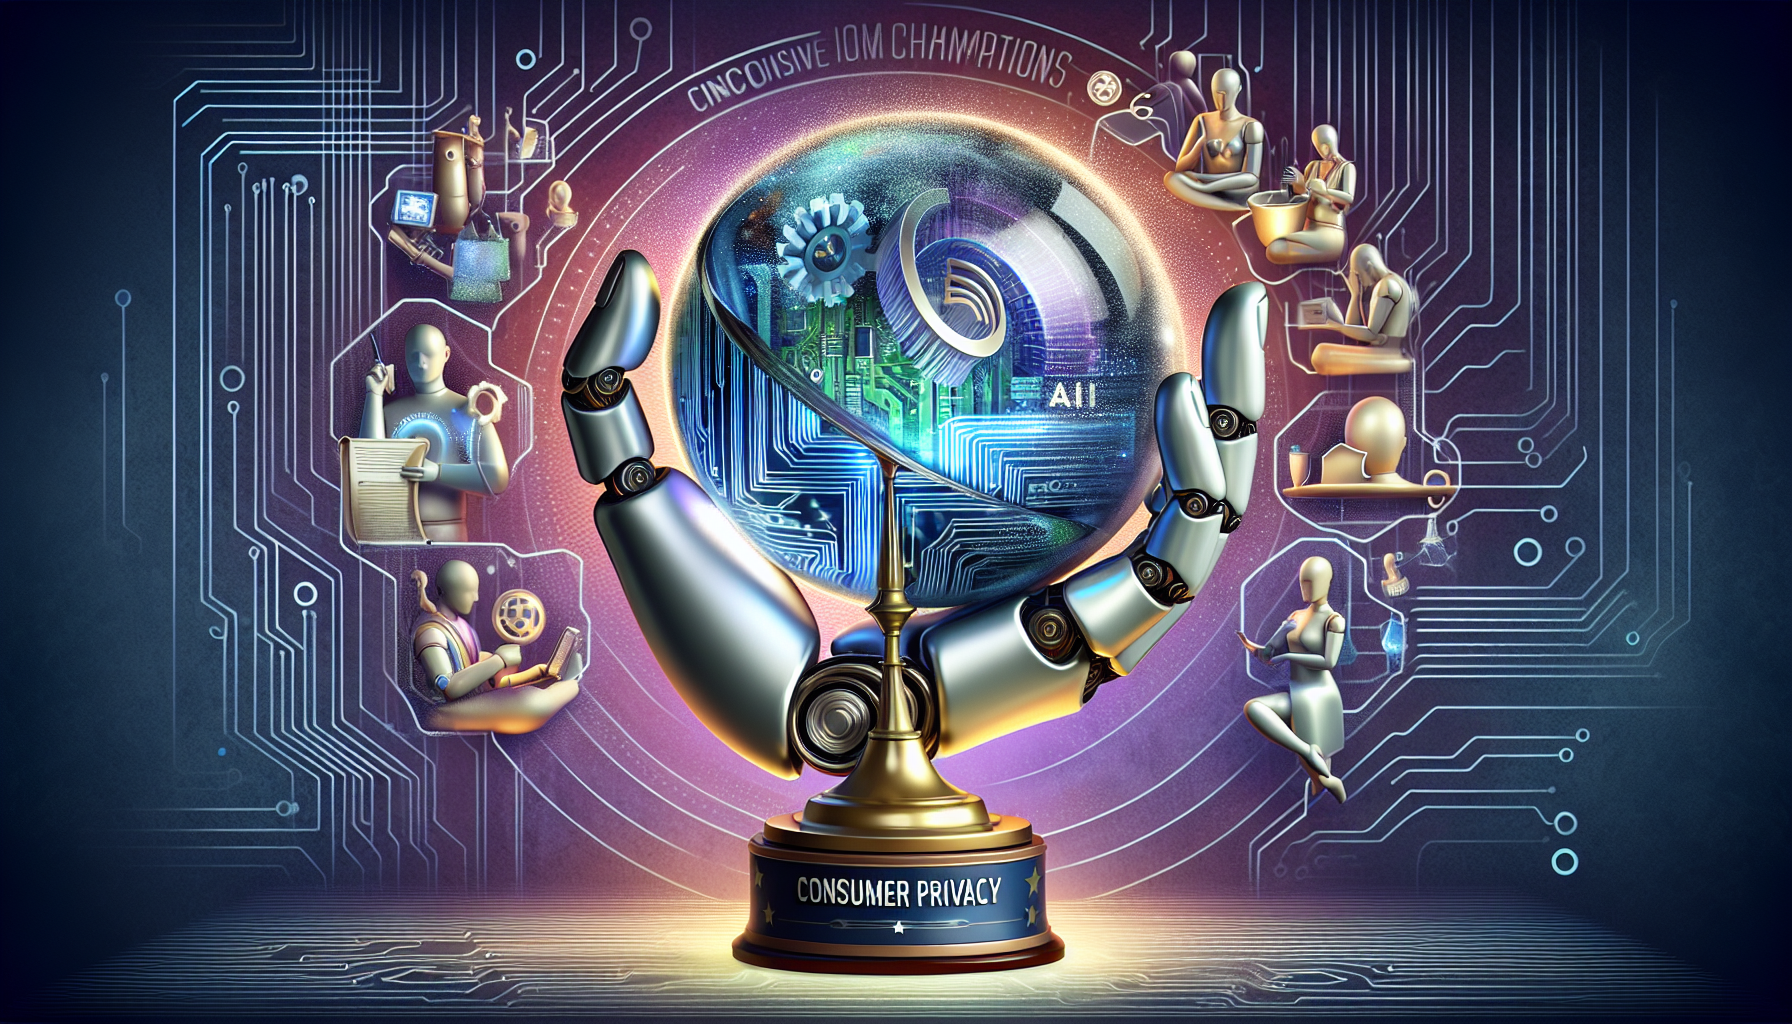 Honor champions AI innovation while prioritizing consumer privacy in tech industry